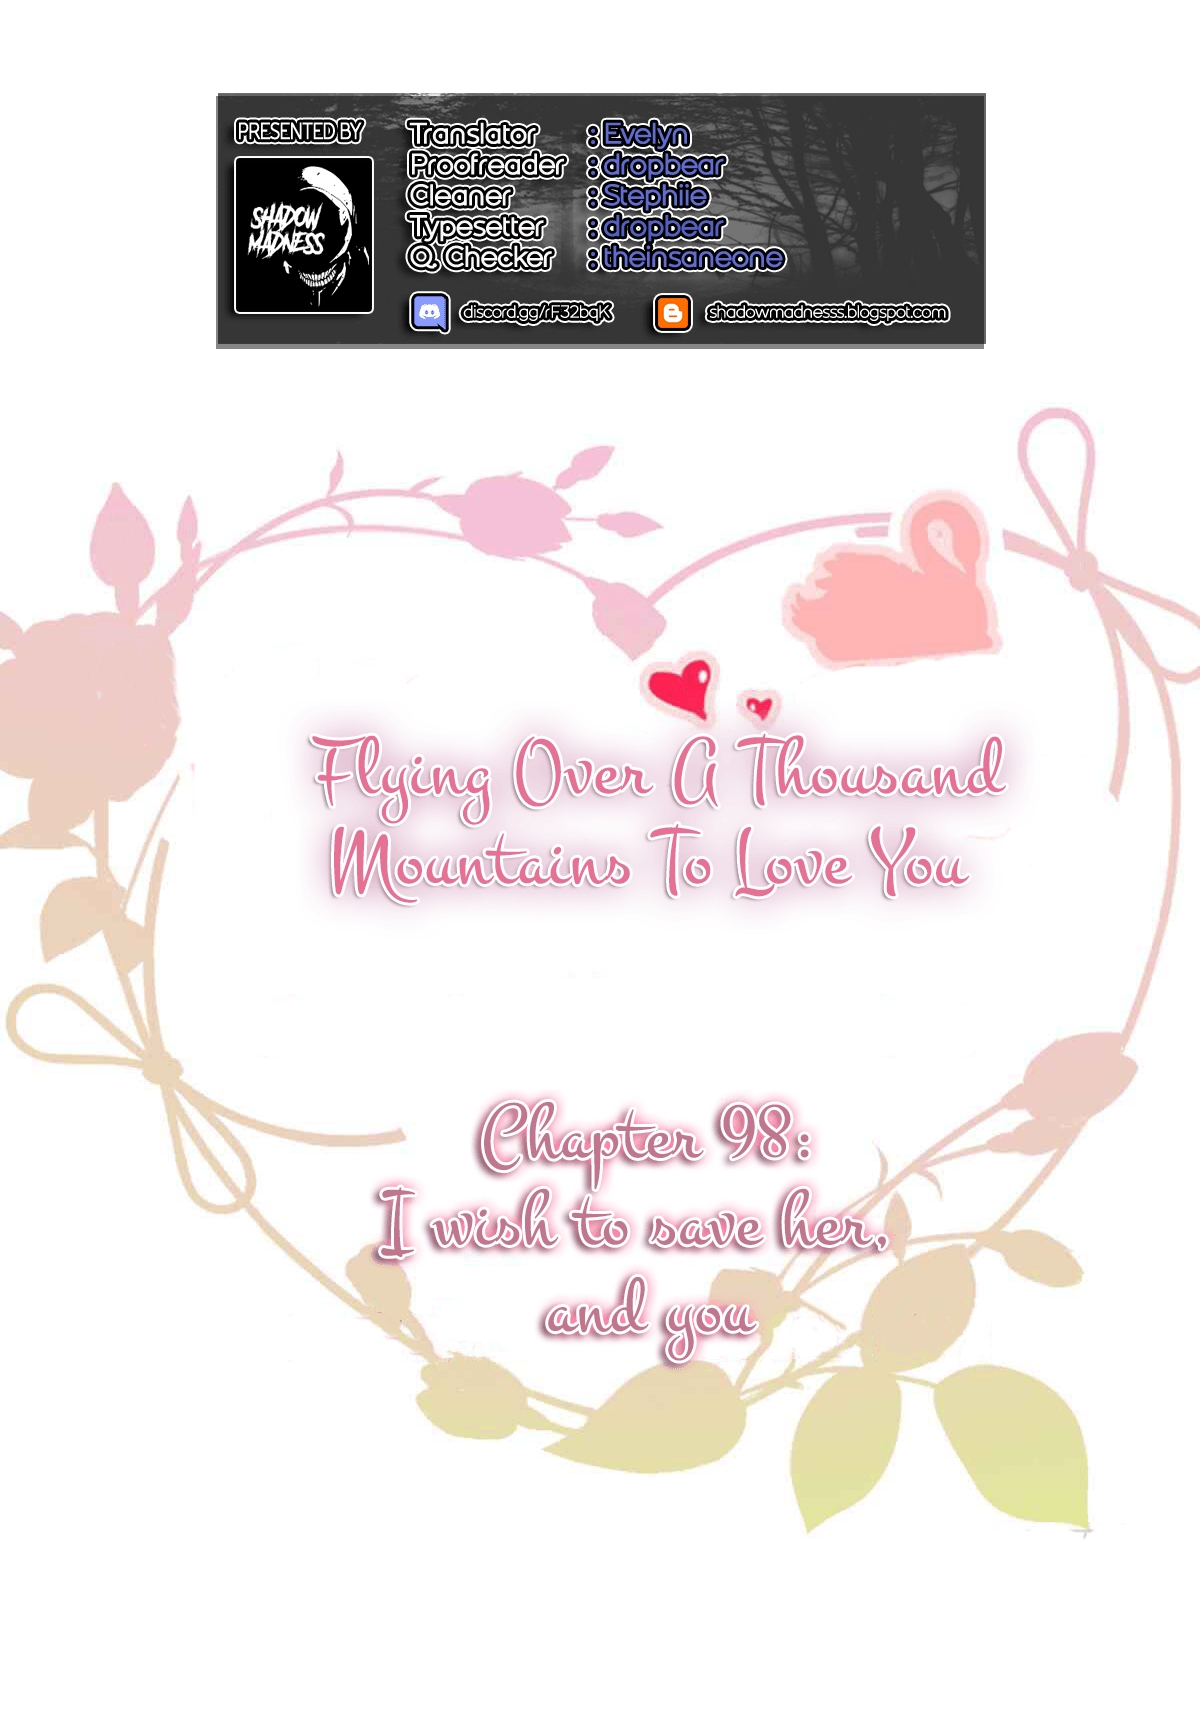 Flying Over a Thousand Mountains to Love You Ch. 98 I wish to save her, and you